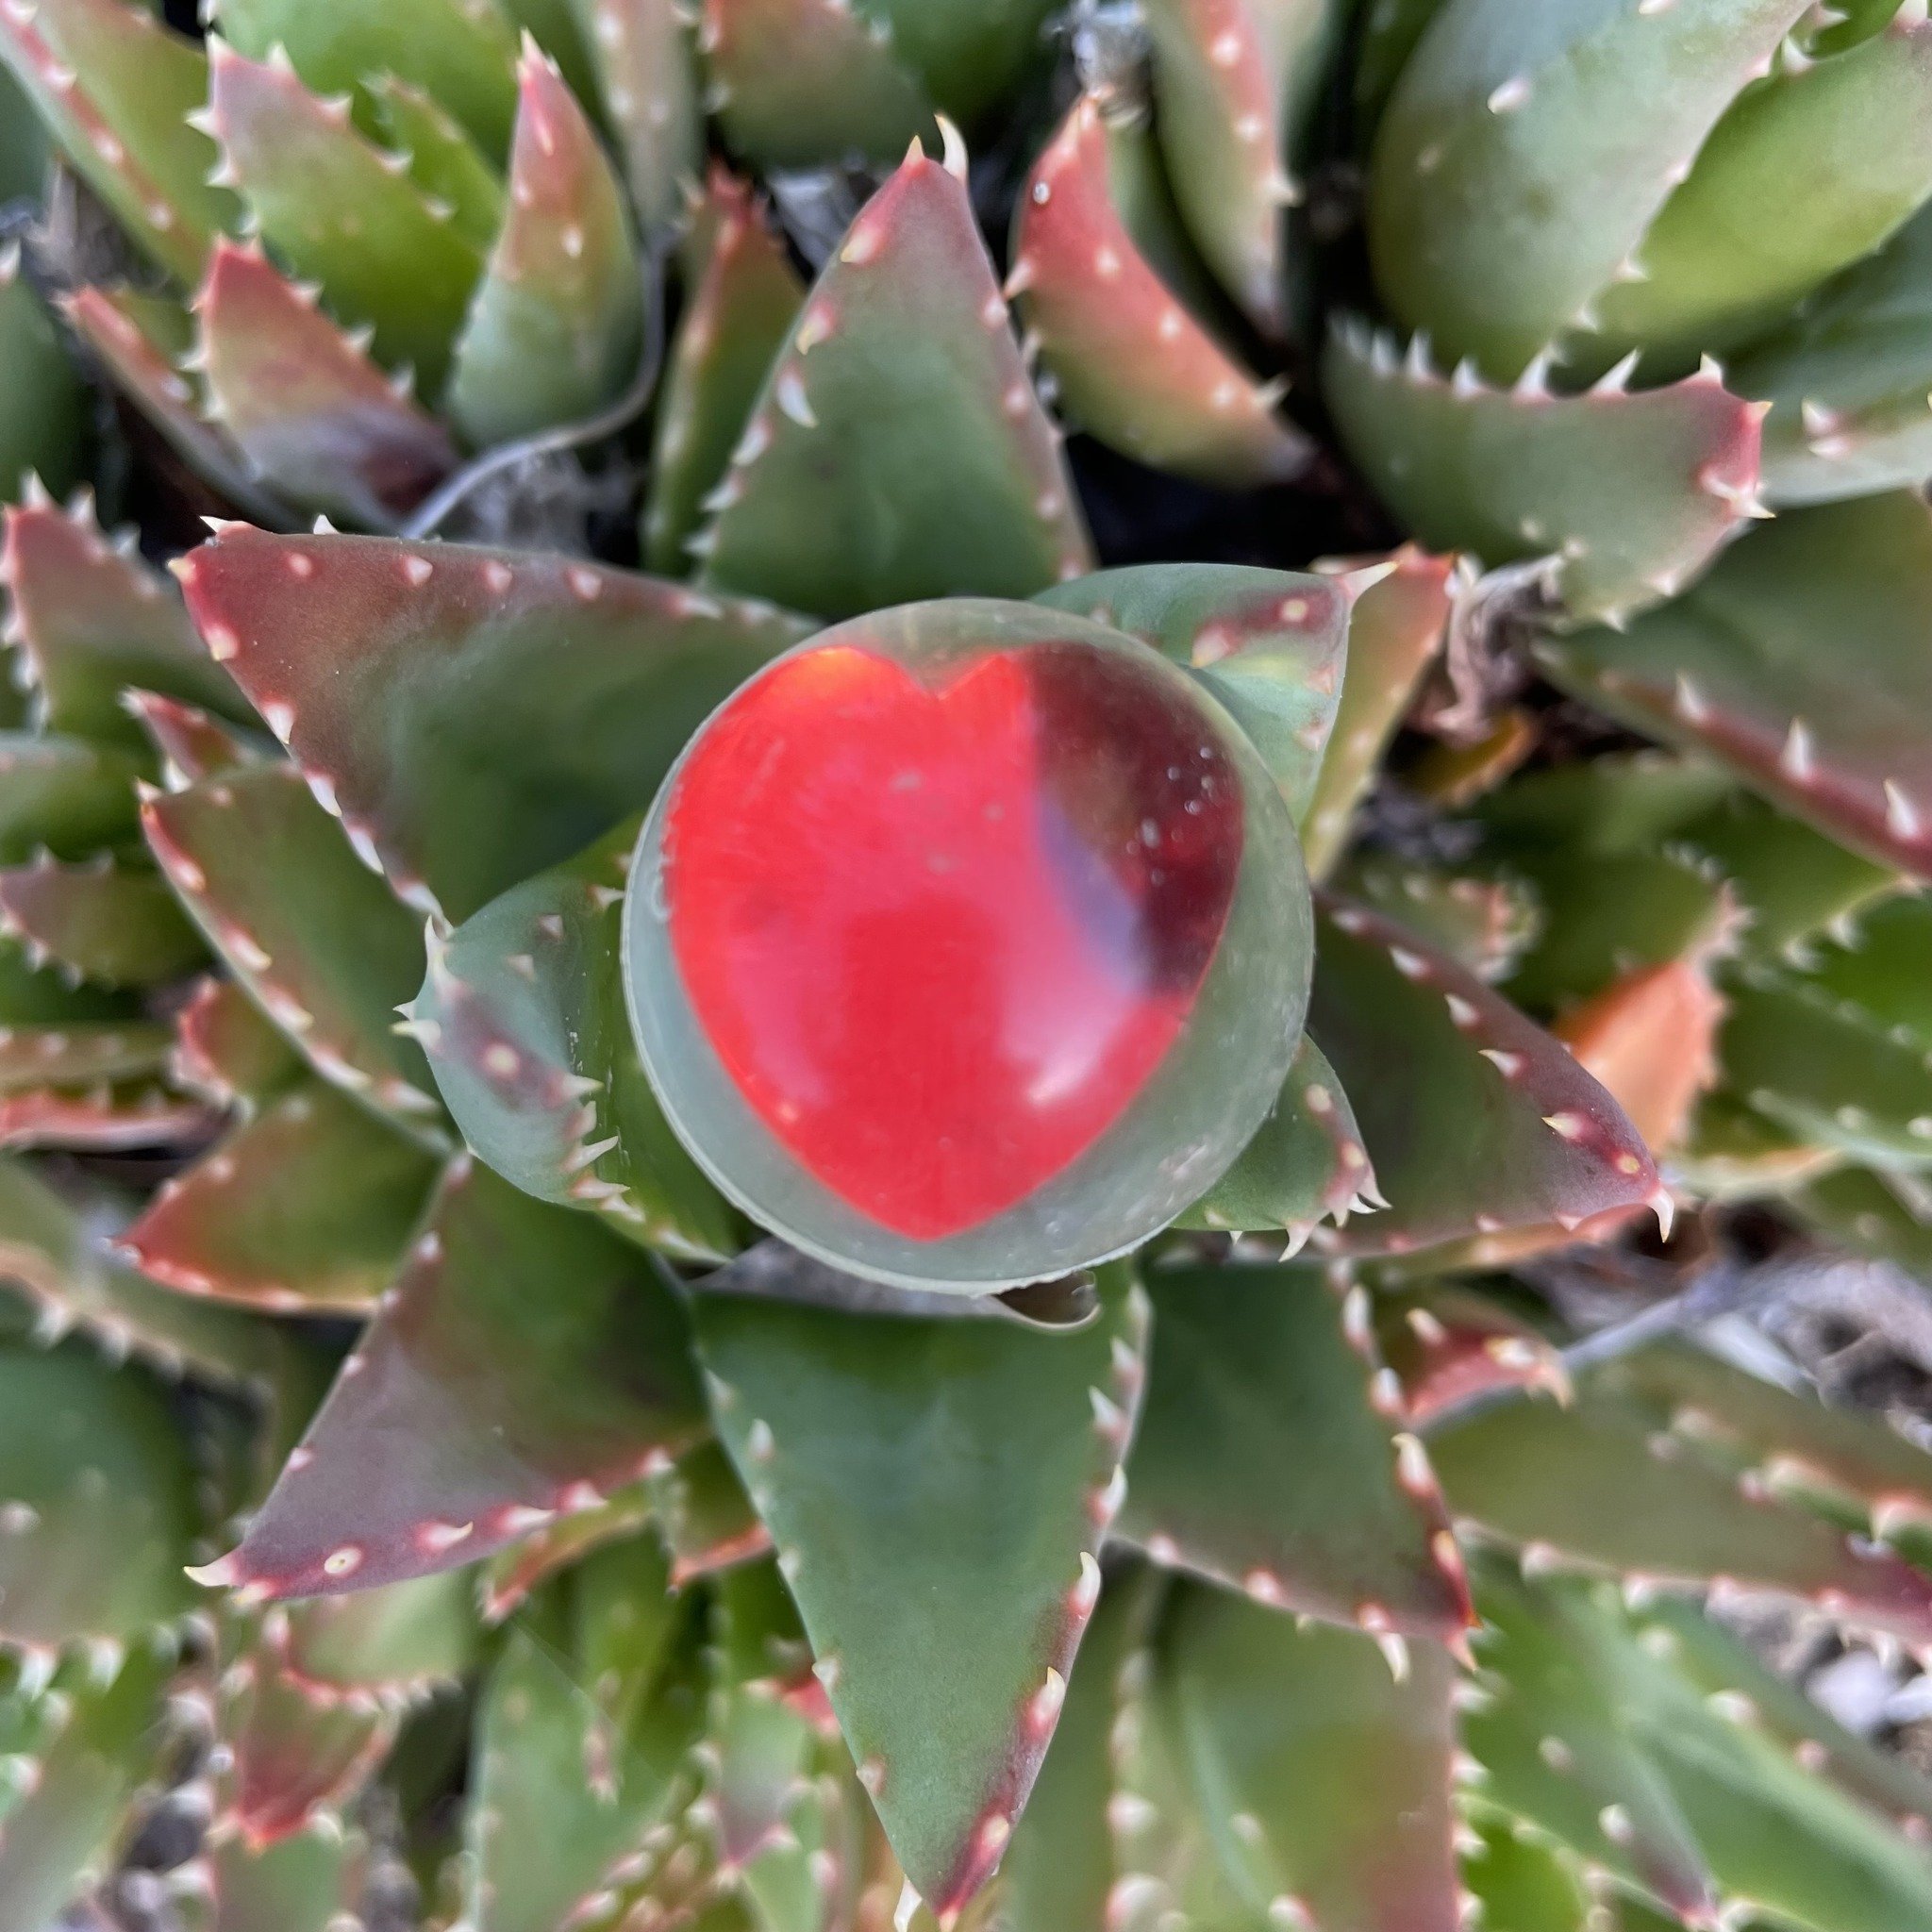 You may not believe me but I found this heart encased in a toy ball in my cactus garden. How much meaning can we make from this? Please post your thoughts in the comments. Seems obvious, no? #hearthealth #noticingmagic #MindfulMonday